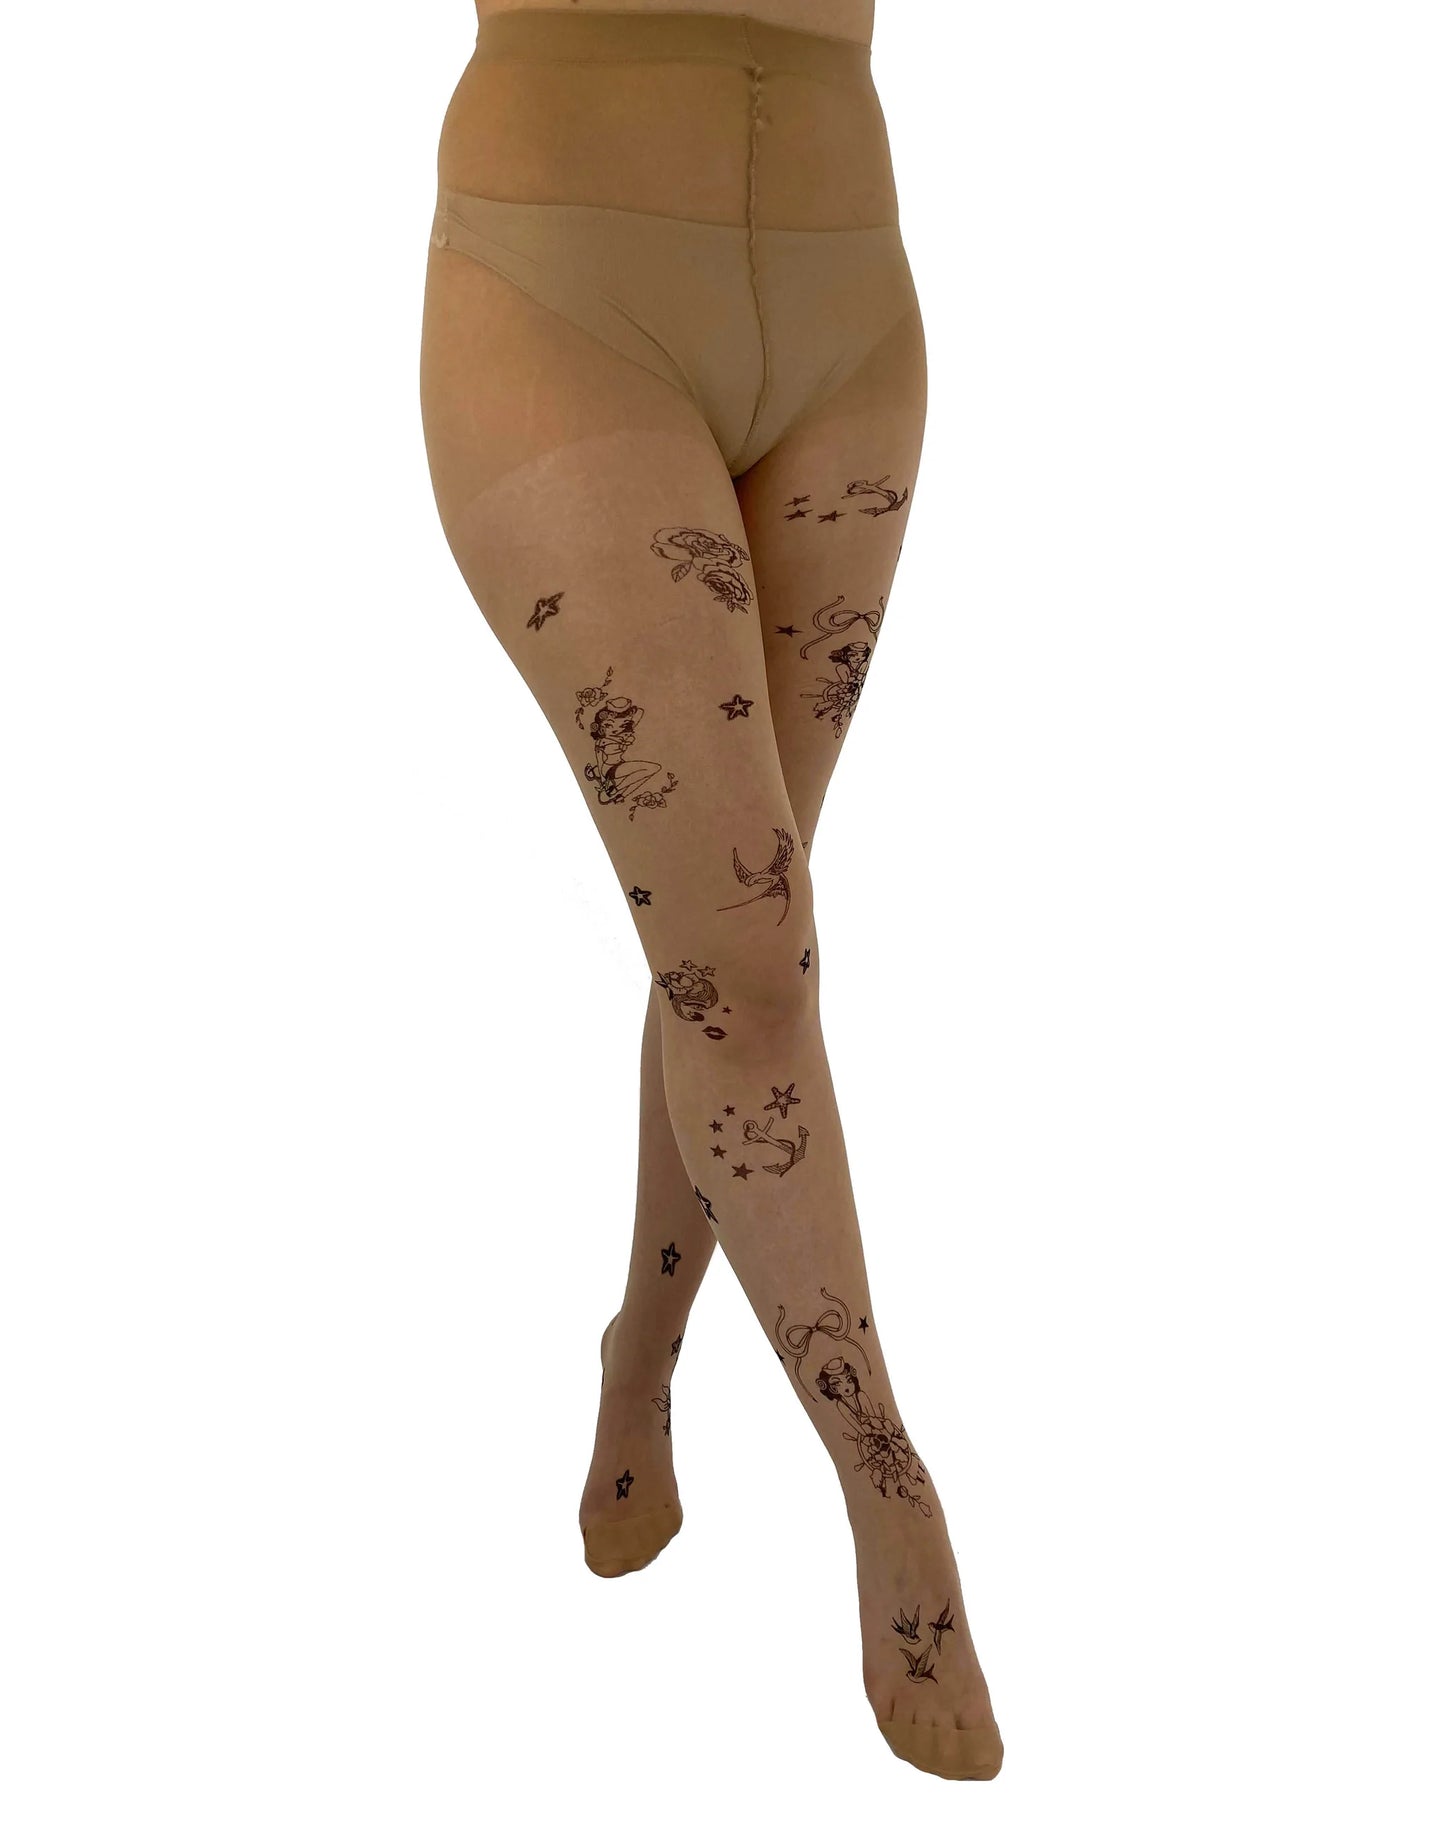 Pamela Mann Tattoo Sailor Girl Tights - nude tights with black nautical tattoo patterned print